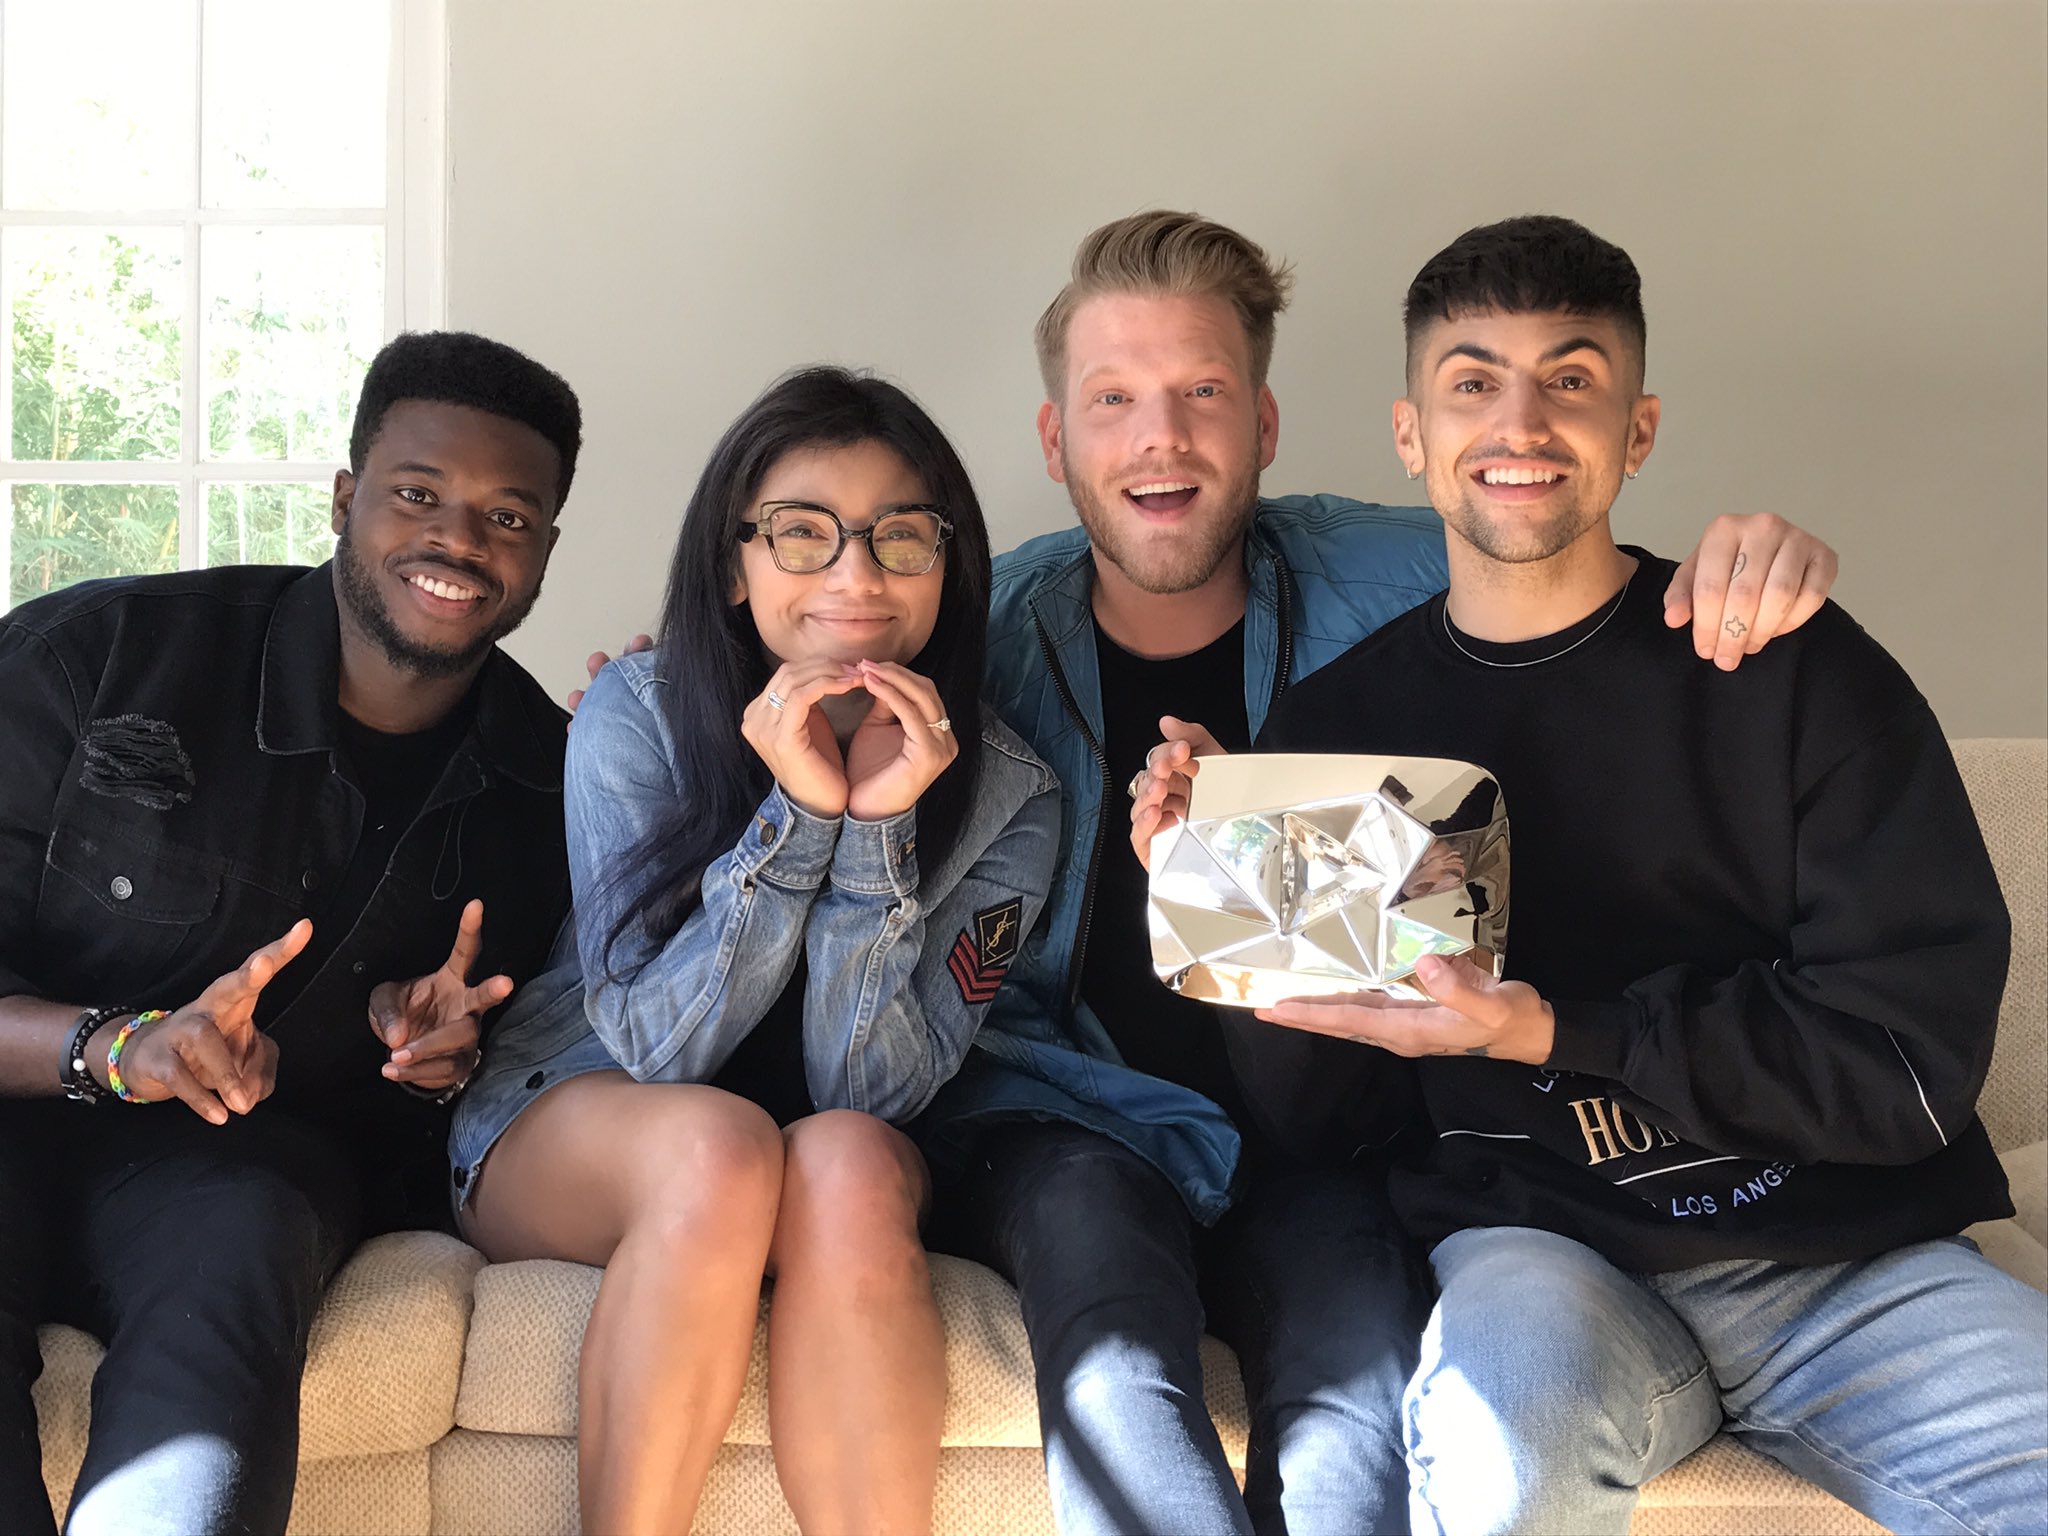 Pentatonix On Twitter Look What We Got Thanks Youtube For Our Very